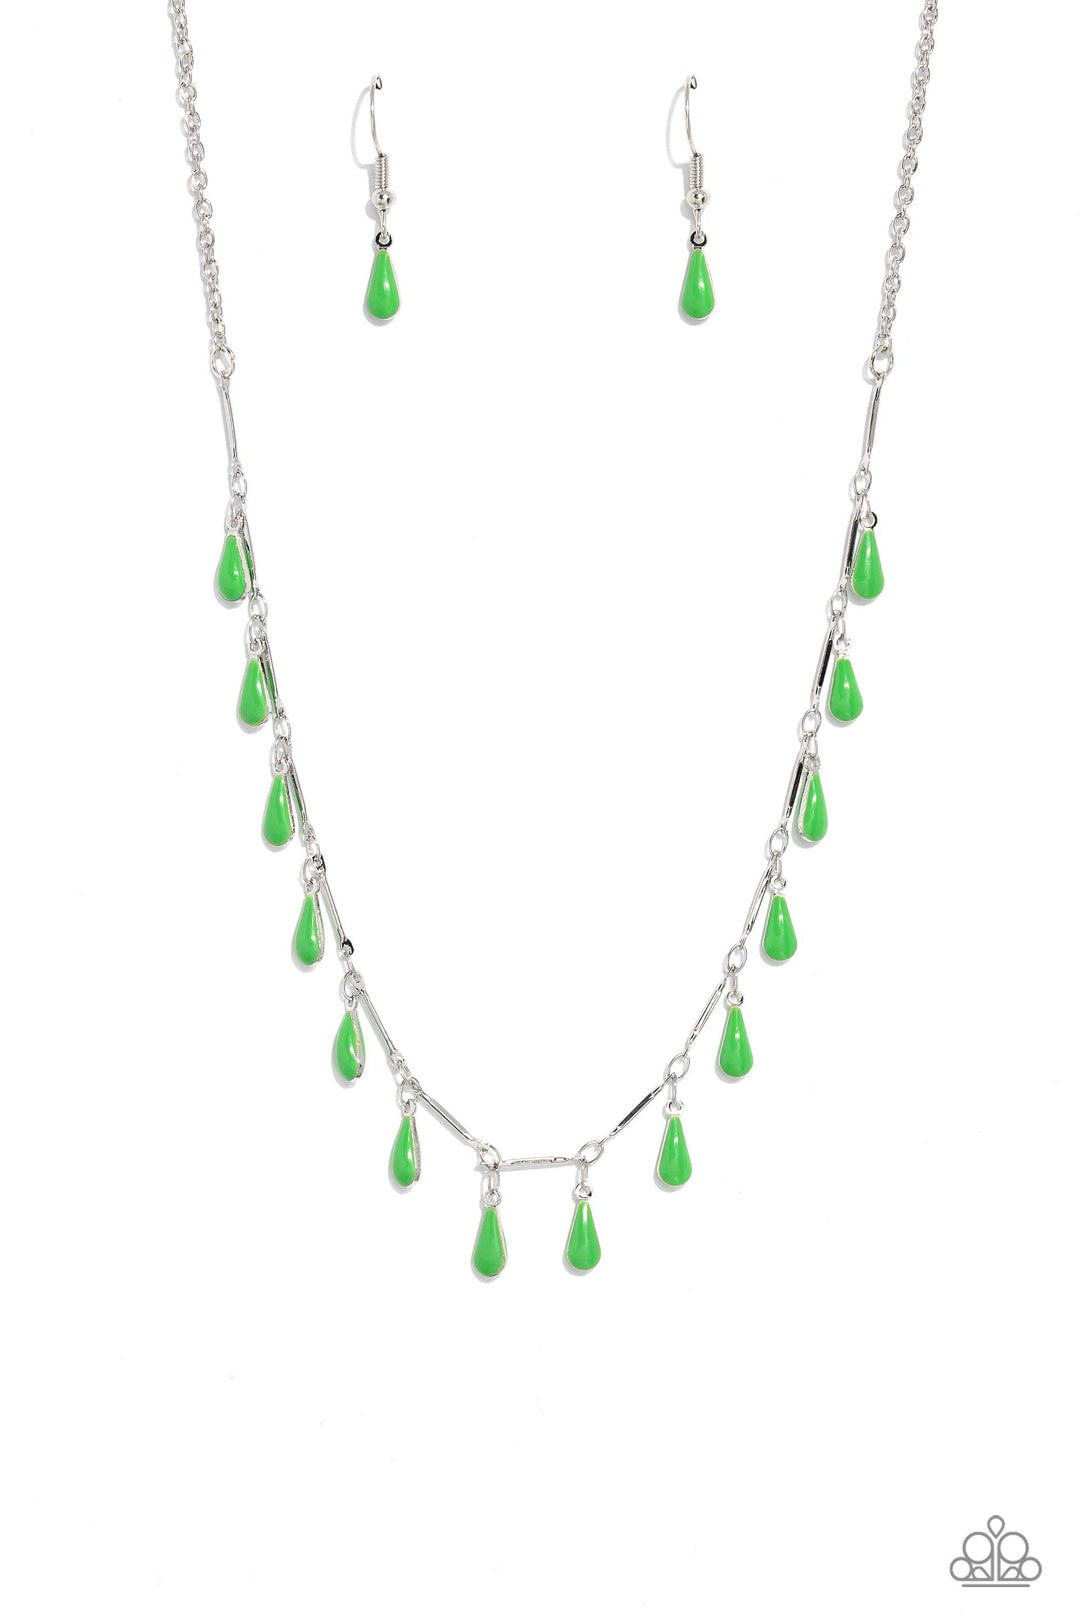 Drop-Dead Dance - Green and Silver Necklace - Paparazzi Accessories - Infused along a dainty silver chain, thin silver bars and dainty, elongated green teardrops drip down the neckline for a fashionable, subtle pop of color.